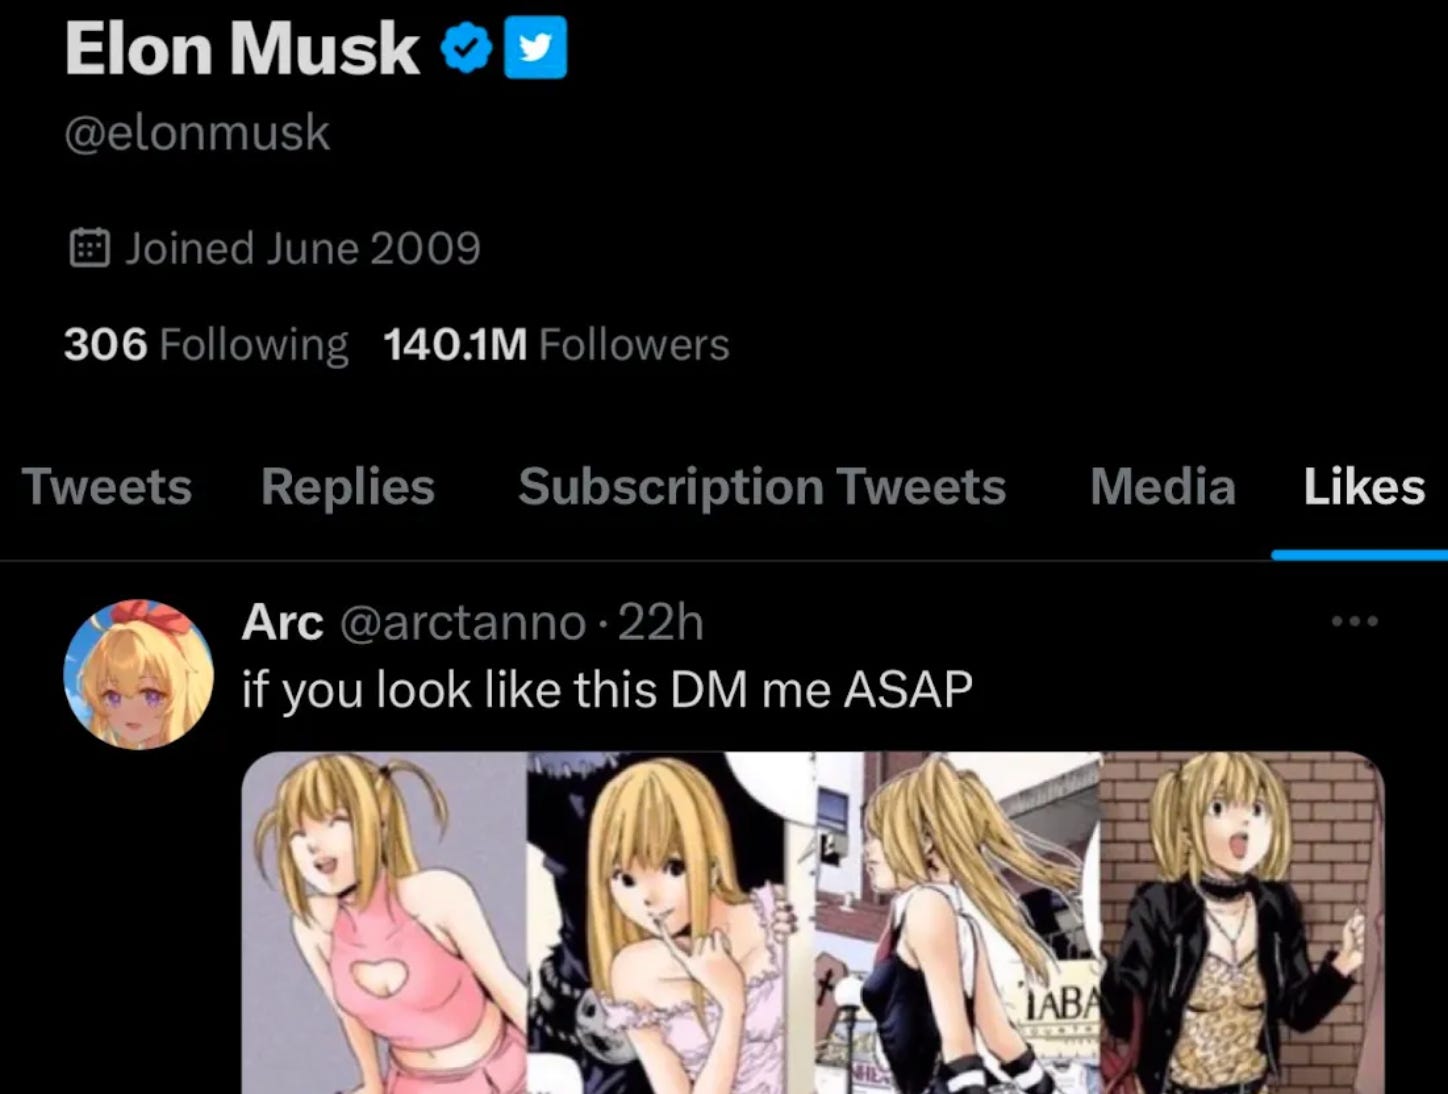 Elon Musk "liking" some manga with young females in it